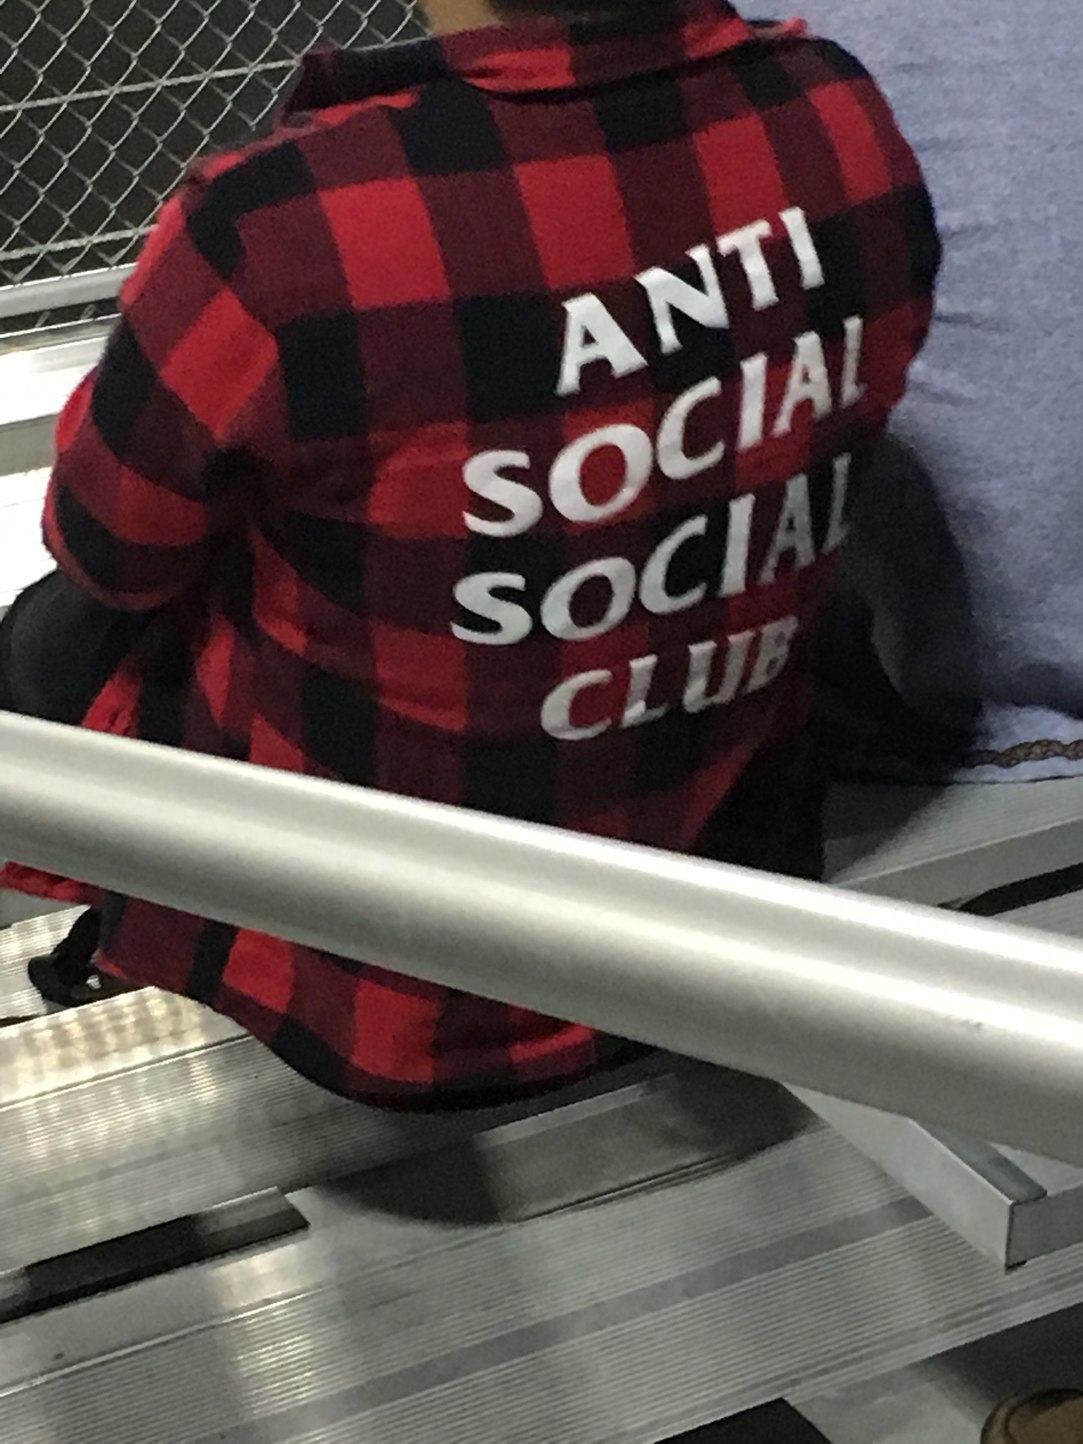 found this at a football game - meme